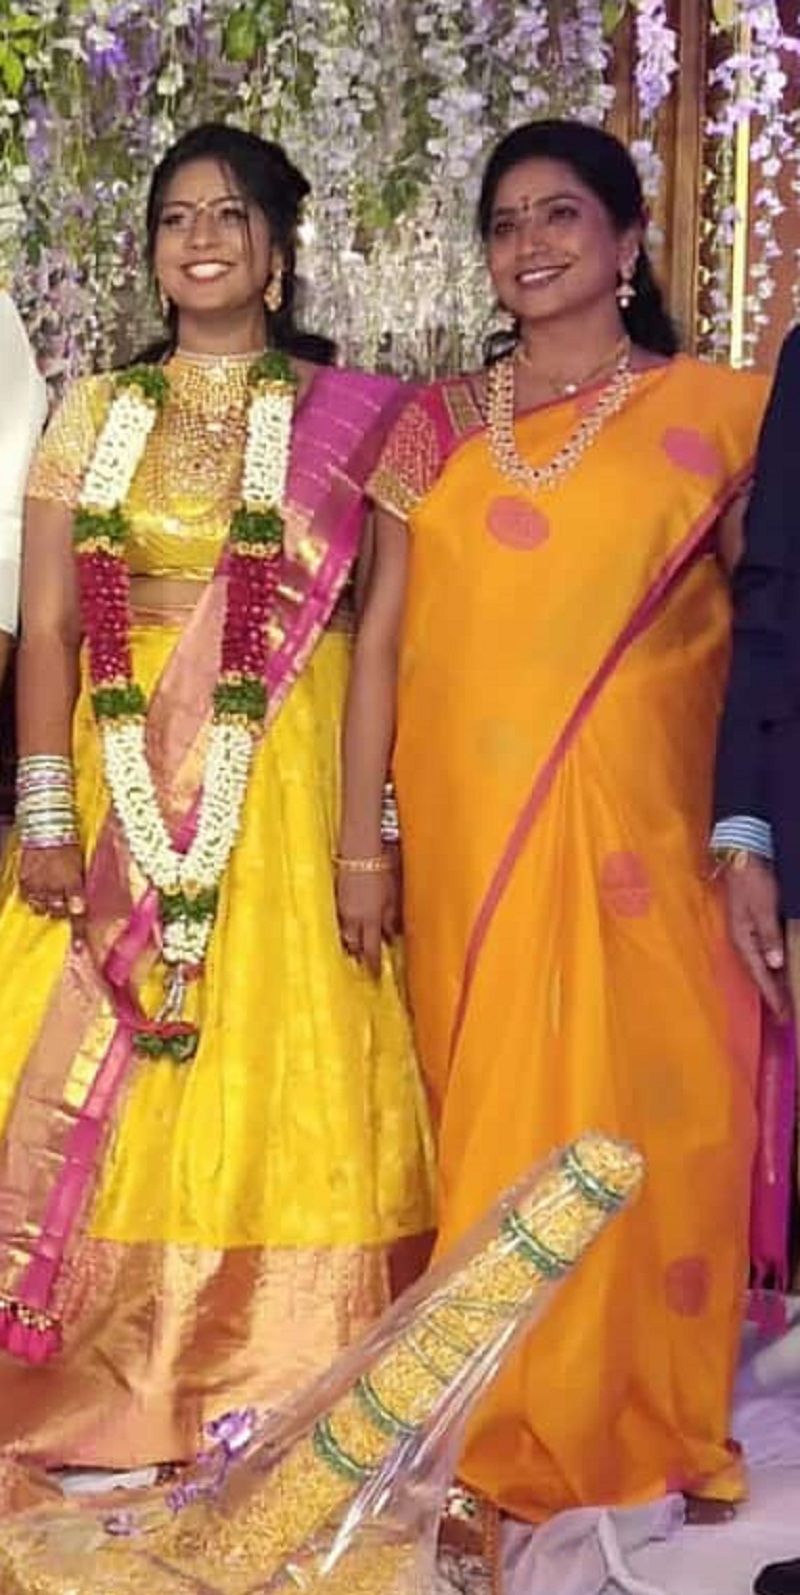 Rekha Naik with her daughter (left)